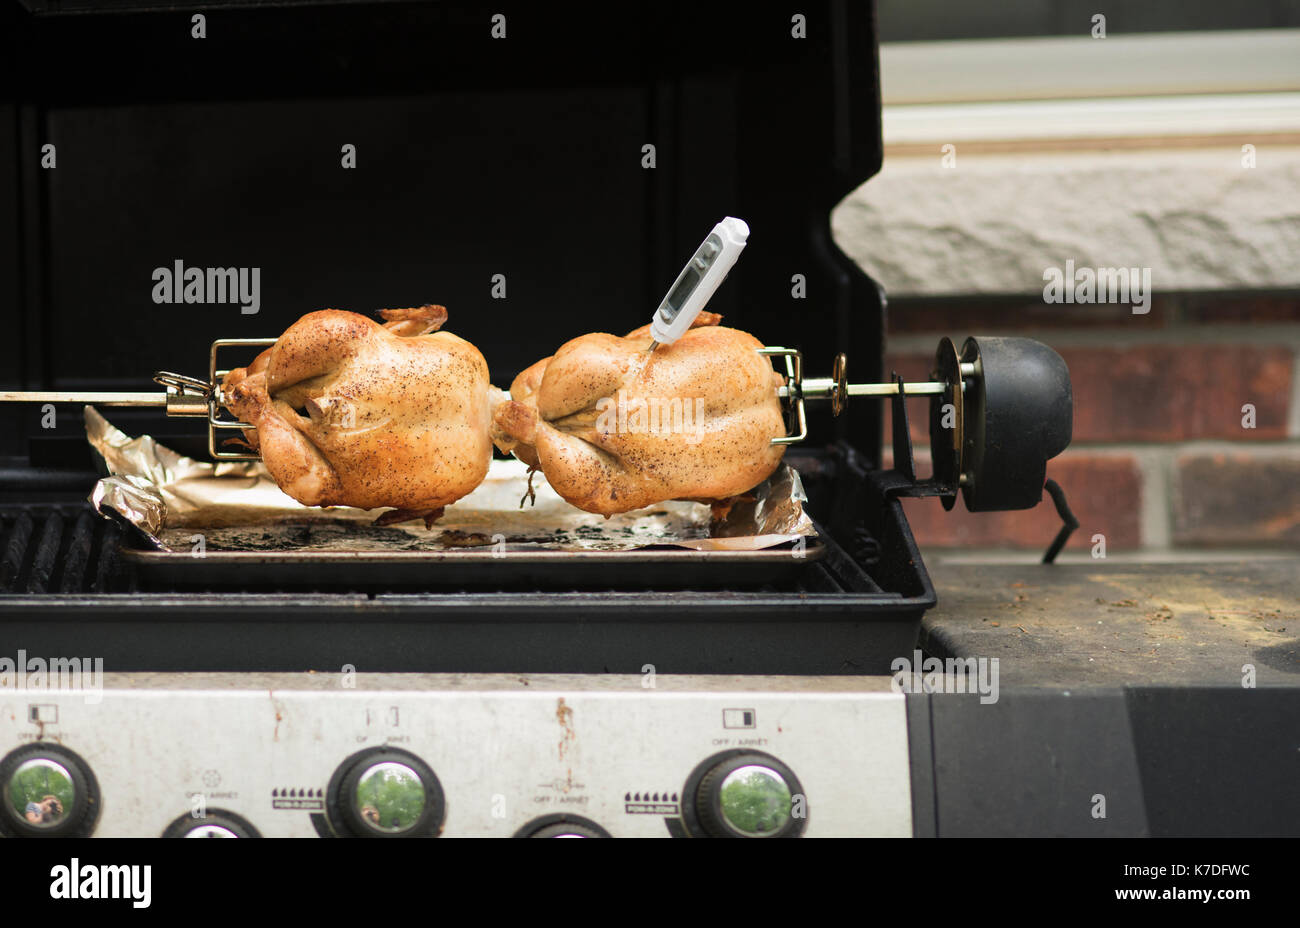 Meat Thermometer And Roasted Chicken At The Correct Temperature Stock Photo  - Download Image Now - iStock